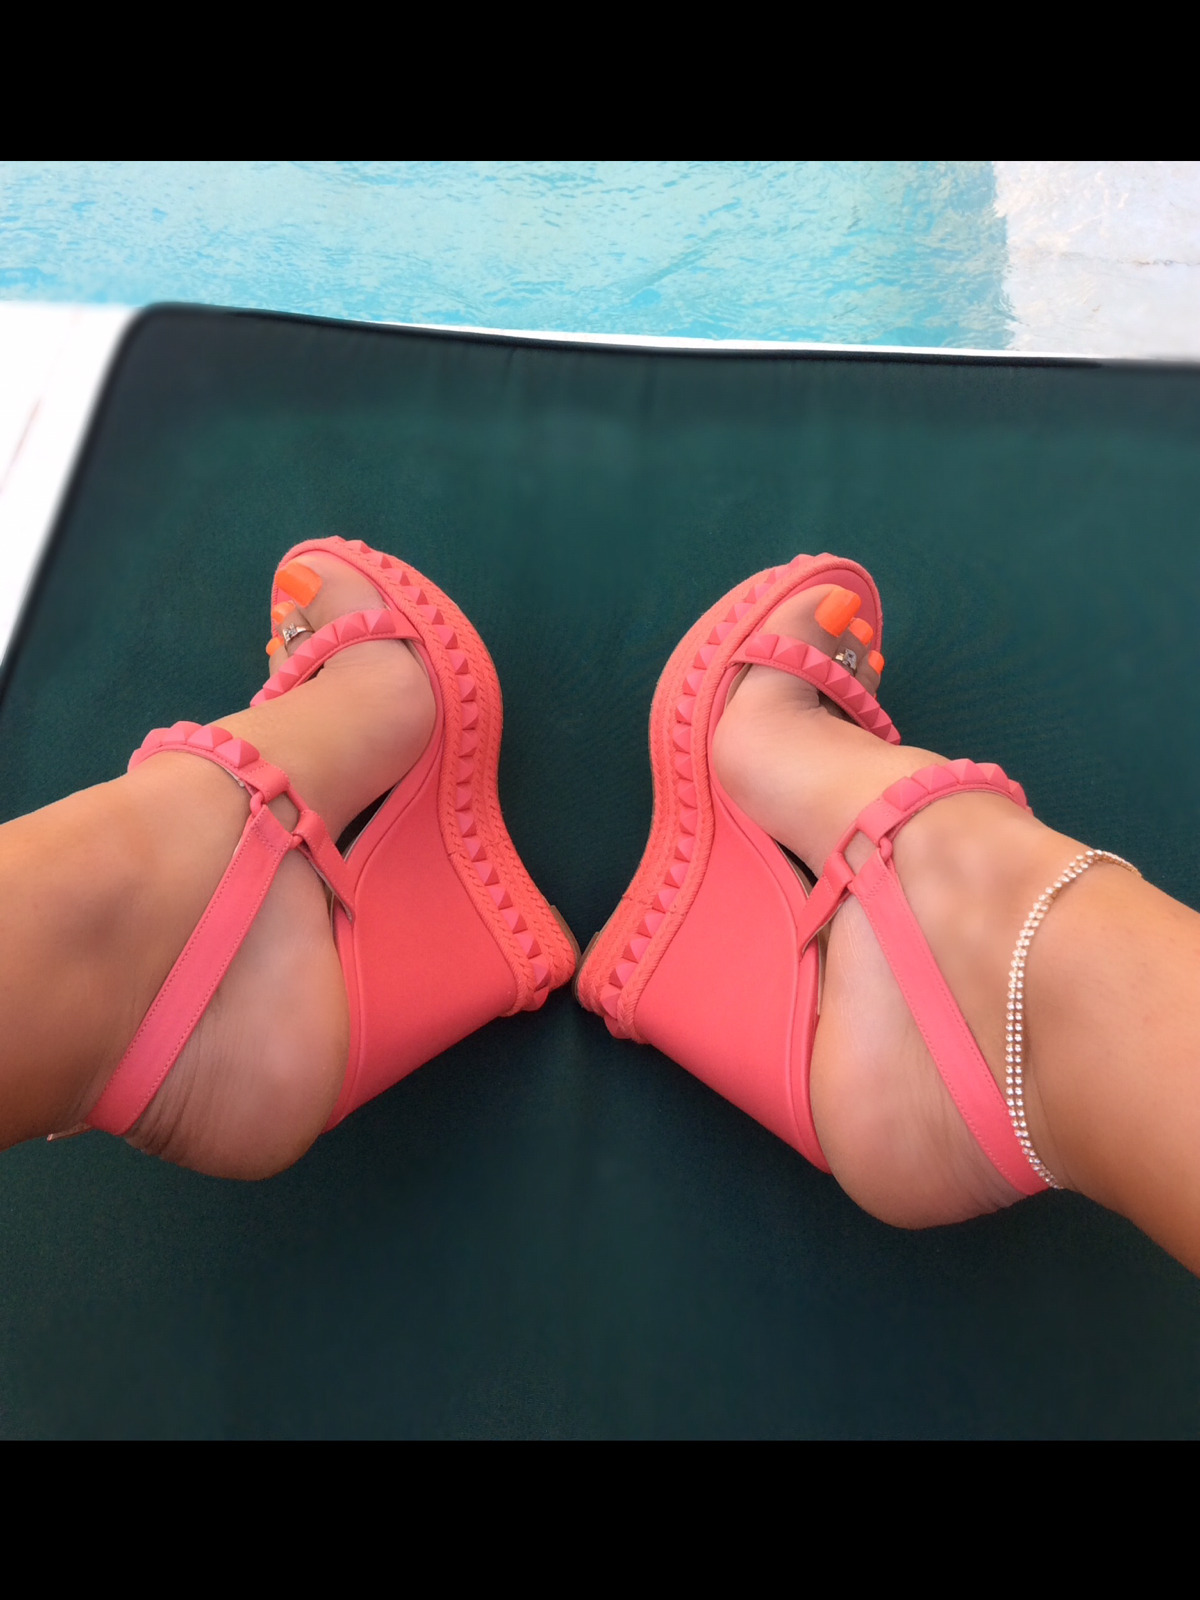 trams-amee:  sissymartina:  By the pool in my sexy wedges! Waiting for someone to